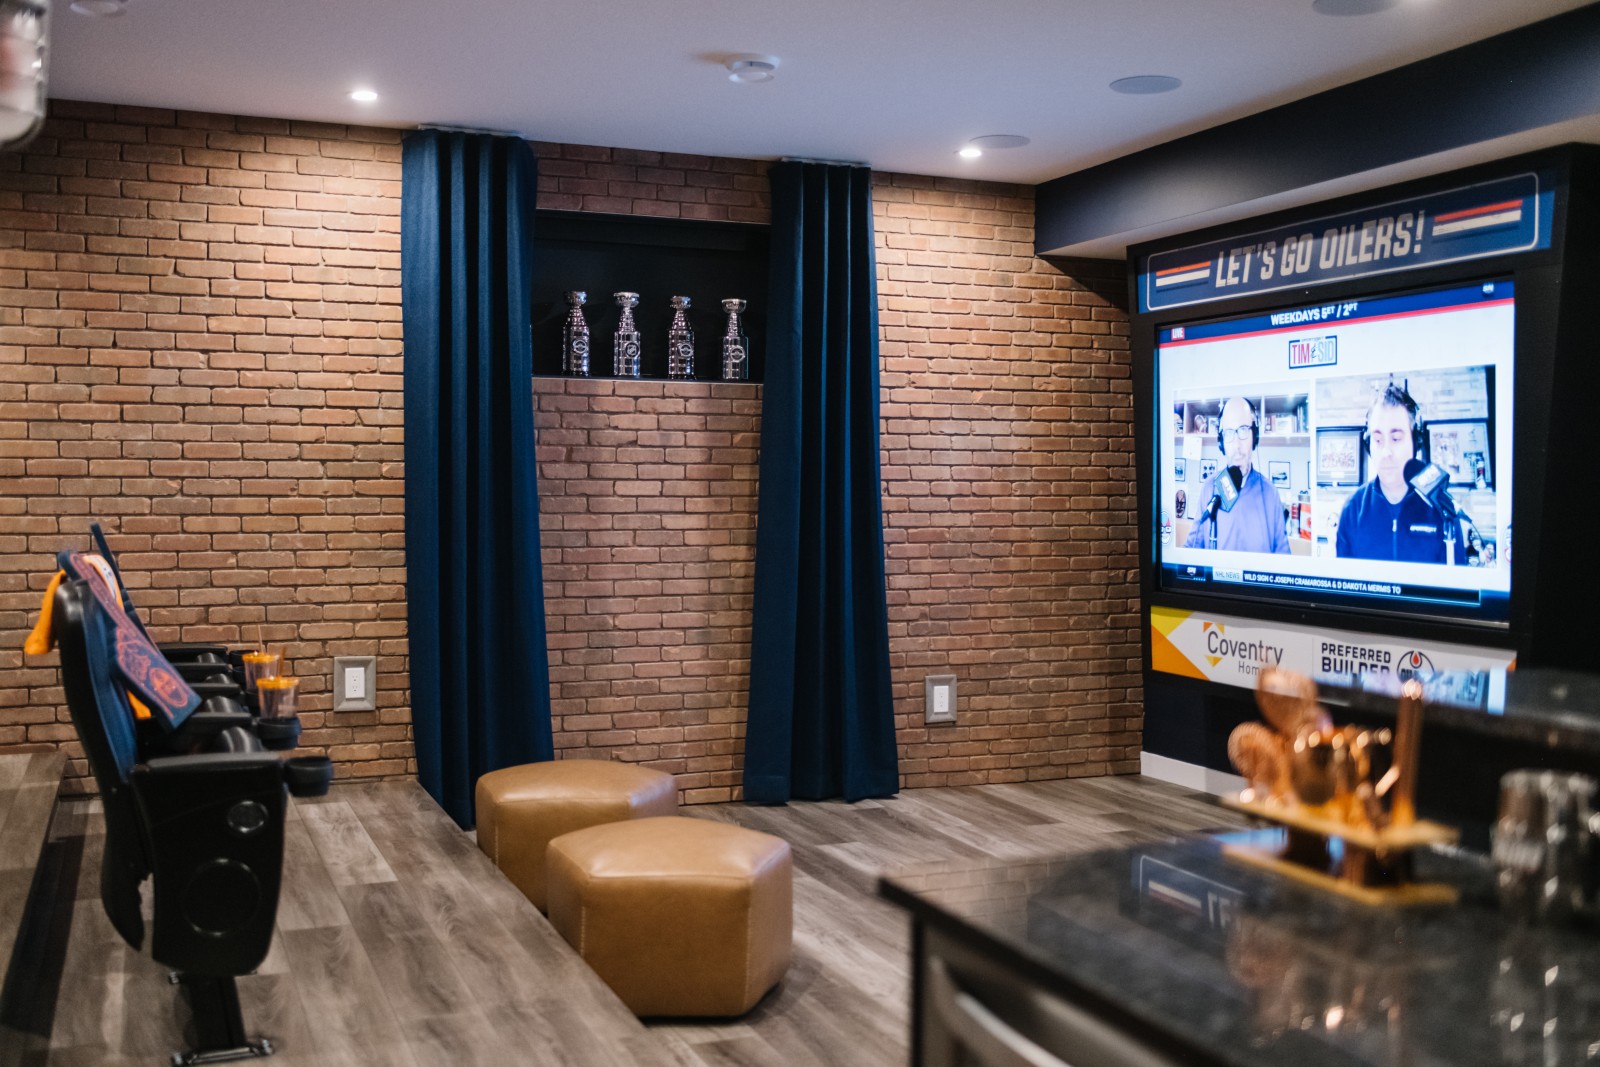 Oilers Fan Cave in the Cy Becker showhome. A brick wall is the focal point of the photos with a large wall mounted jumbotron to the right of the wall and stadium seats to the left